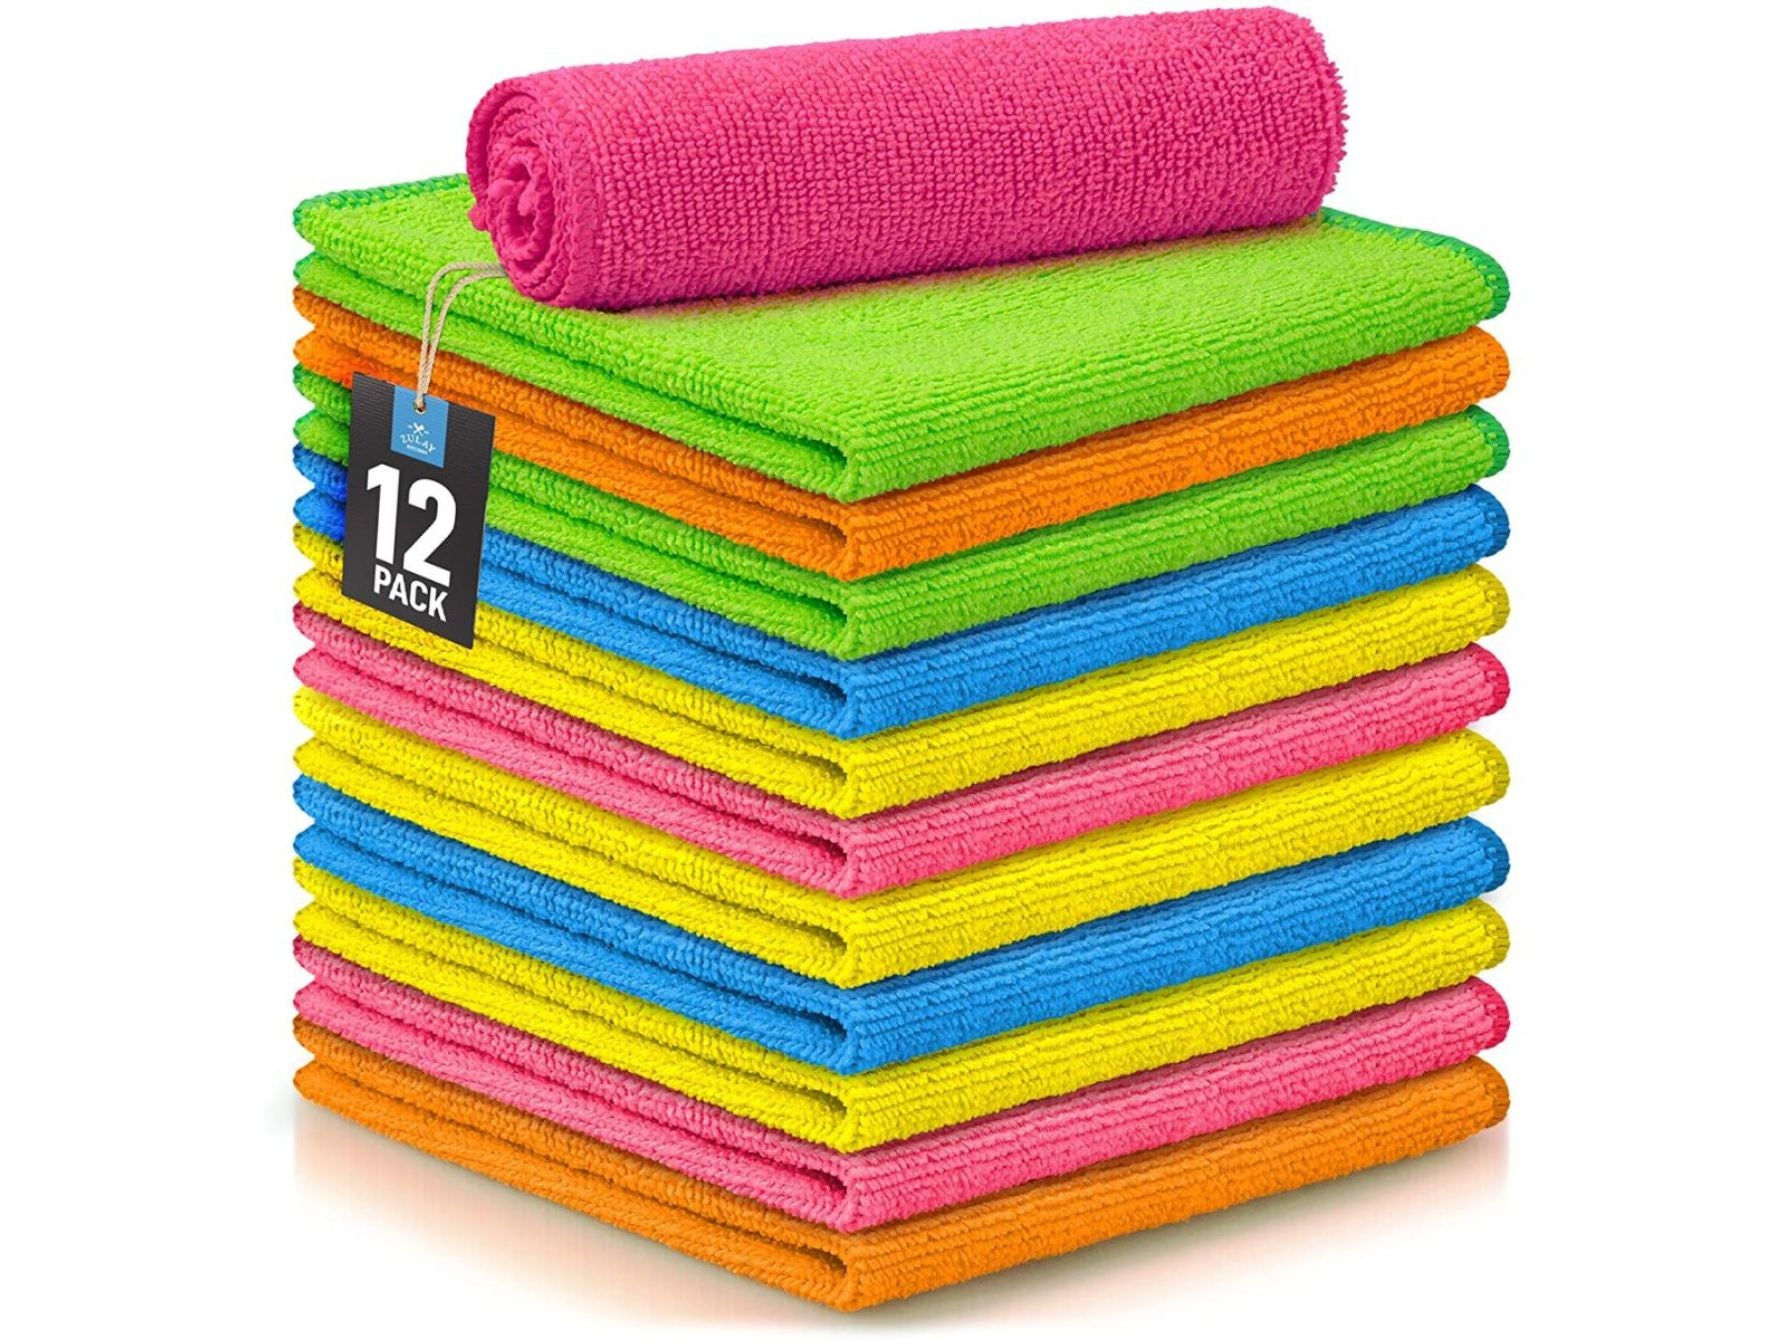 Microfiber Cleaning Cloths - 12 Pack of Highly Absorbent, Soft Microfiber Cloths